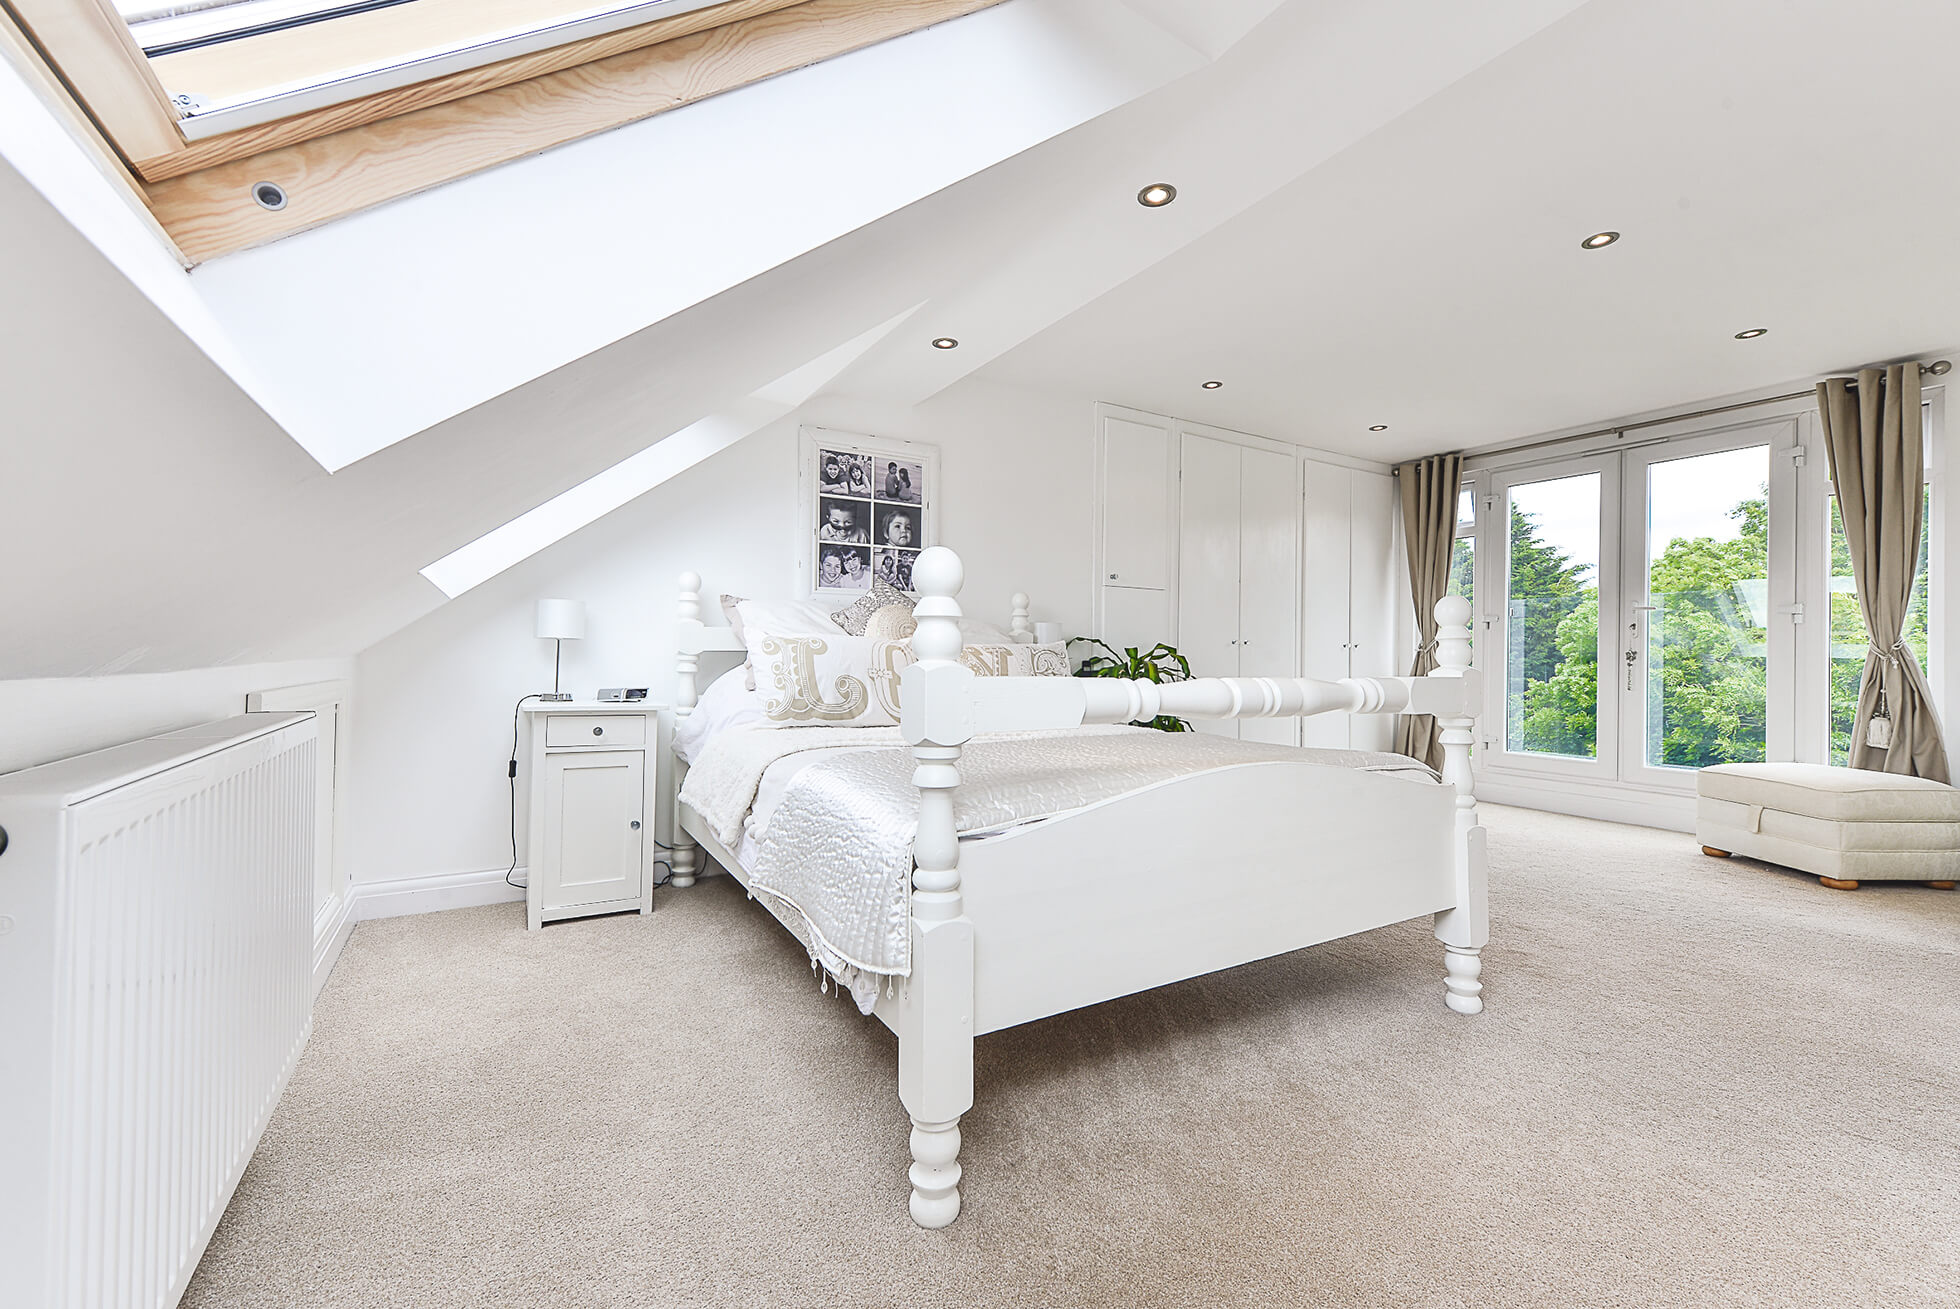 Do you have a question about converting your Loft in Clothall? Here are the most popular questions asked by our clients.